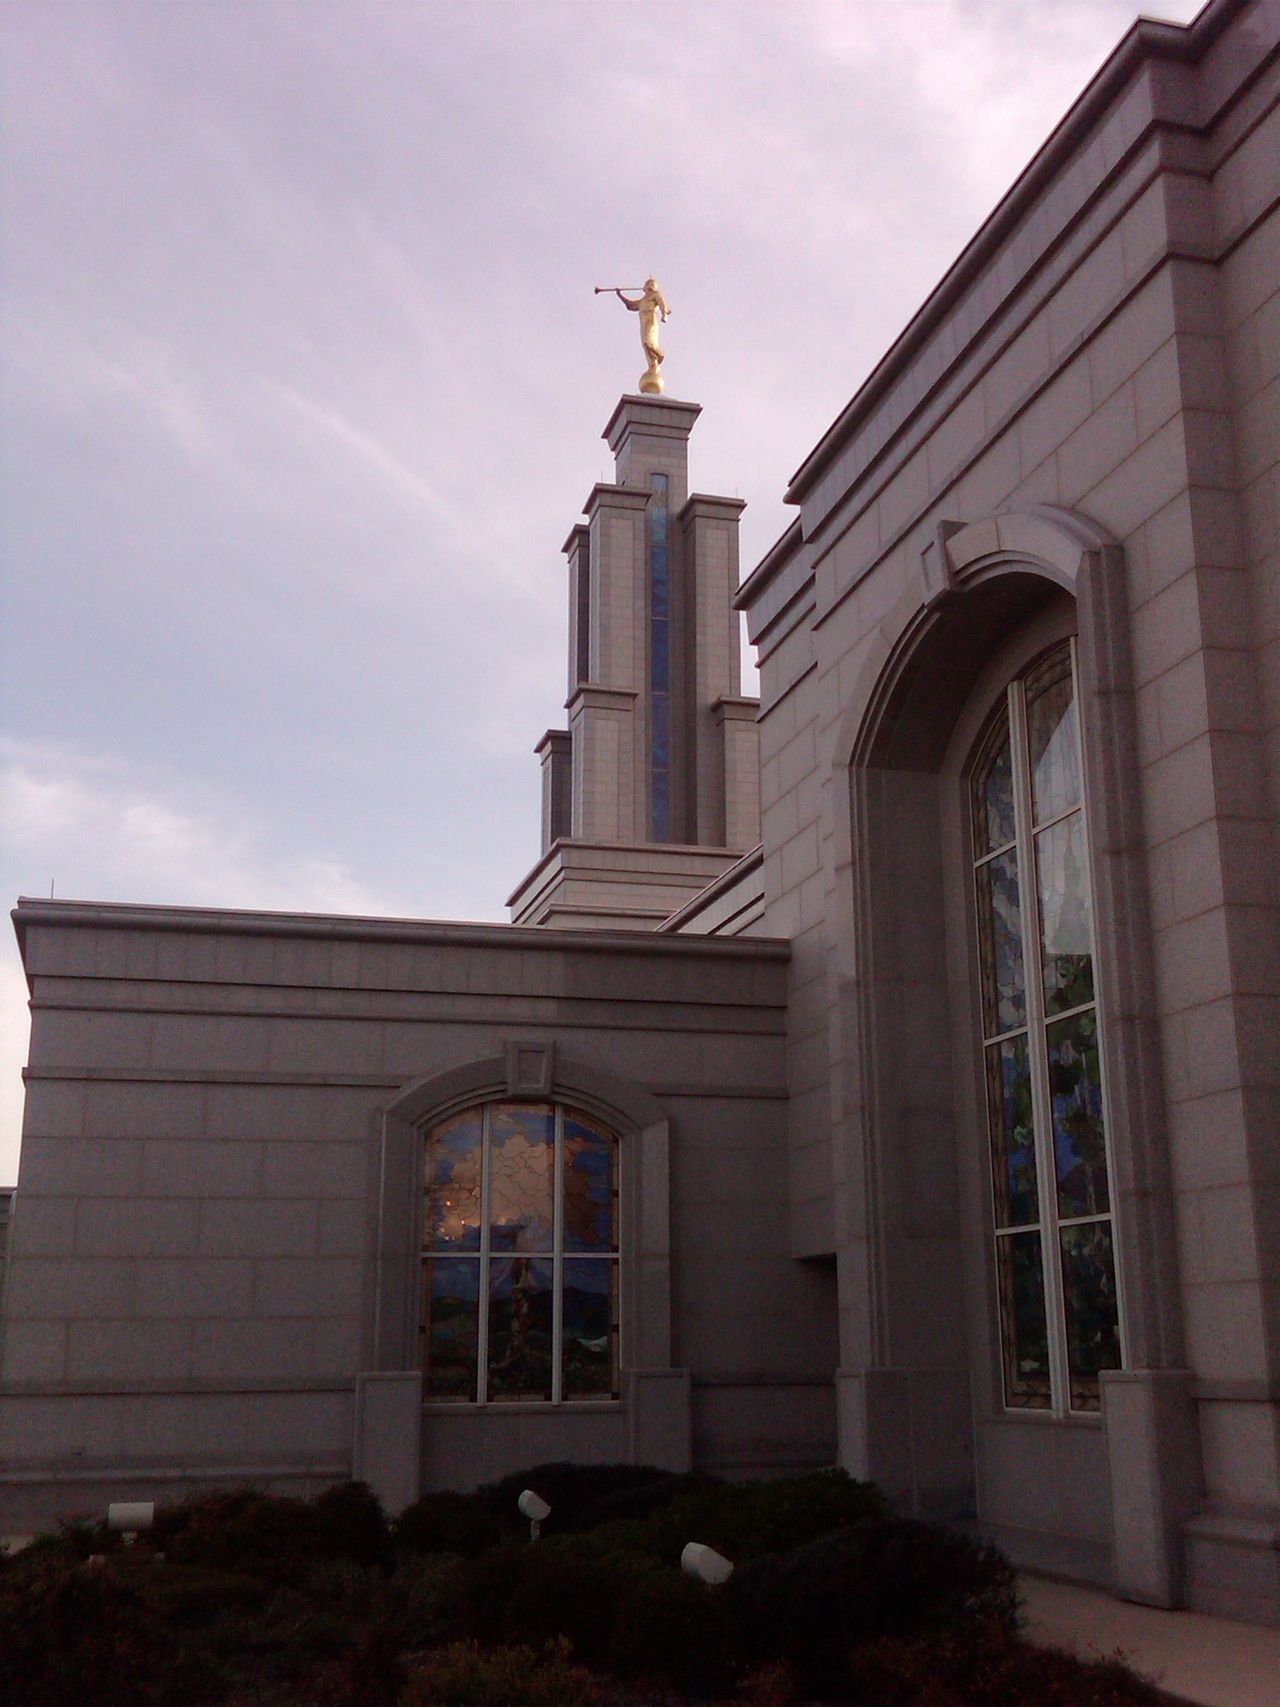 The San Antonio Texas Temple, including the windows and spire.